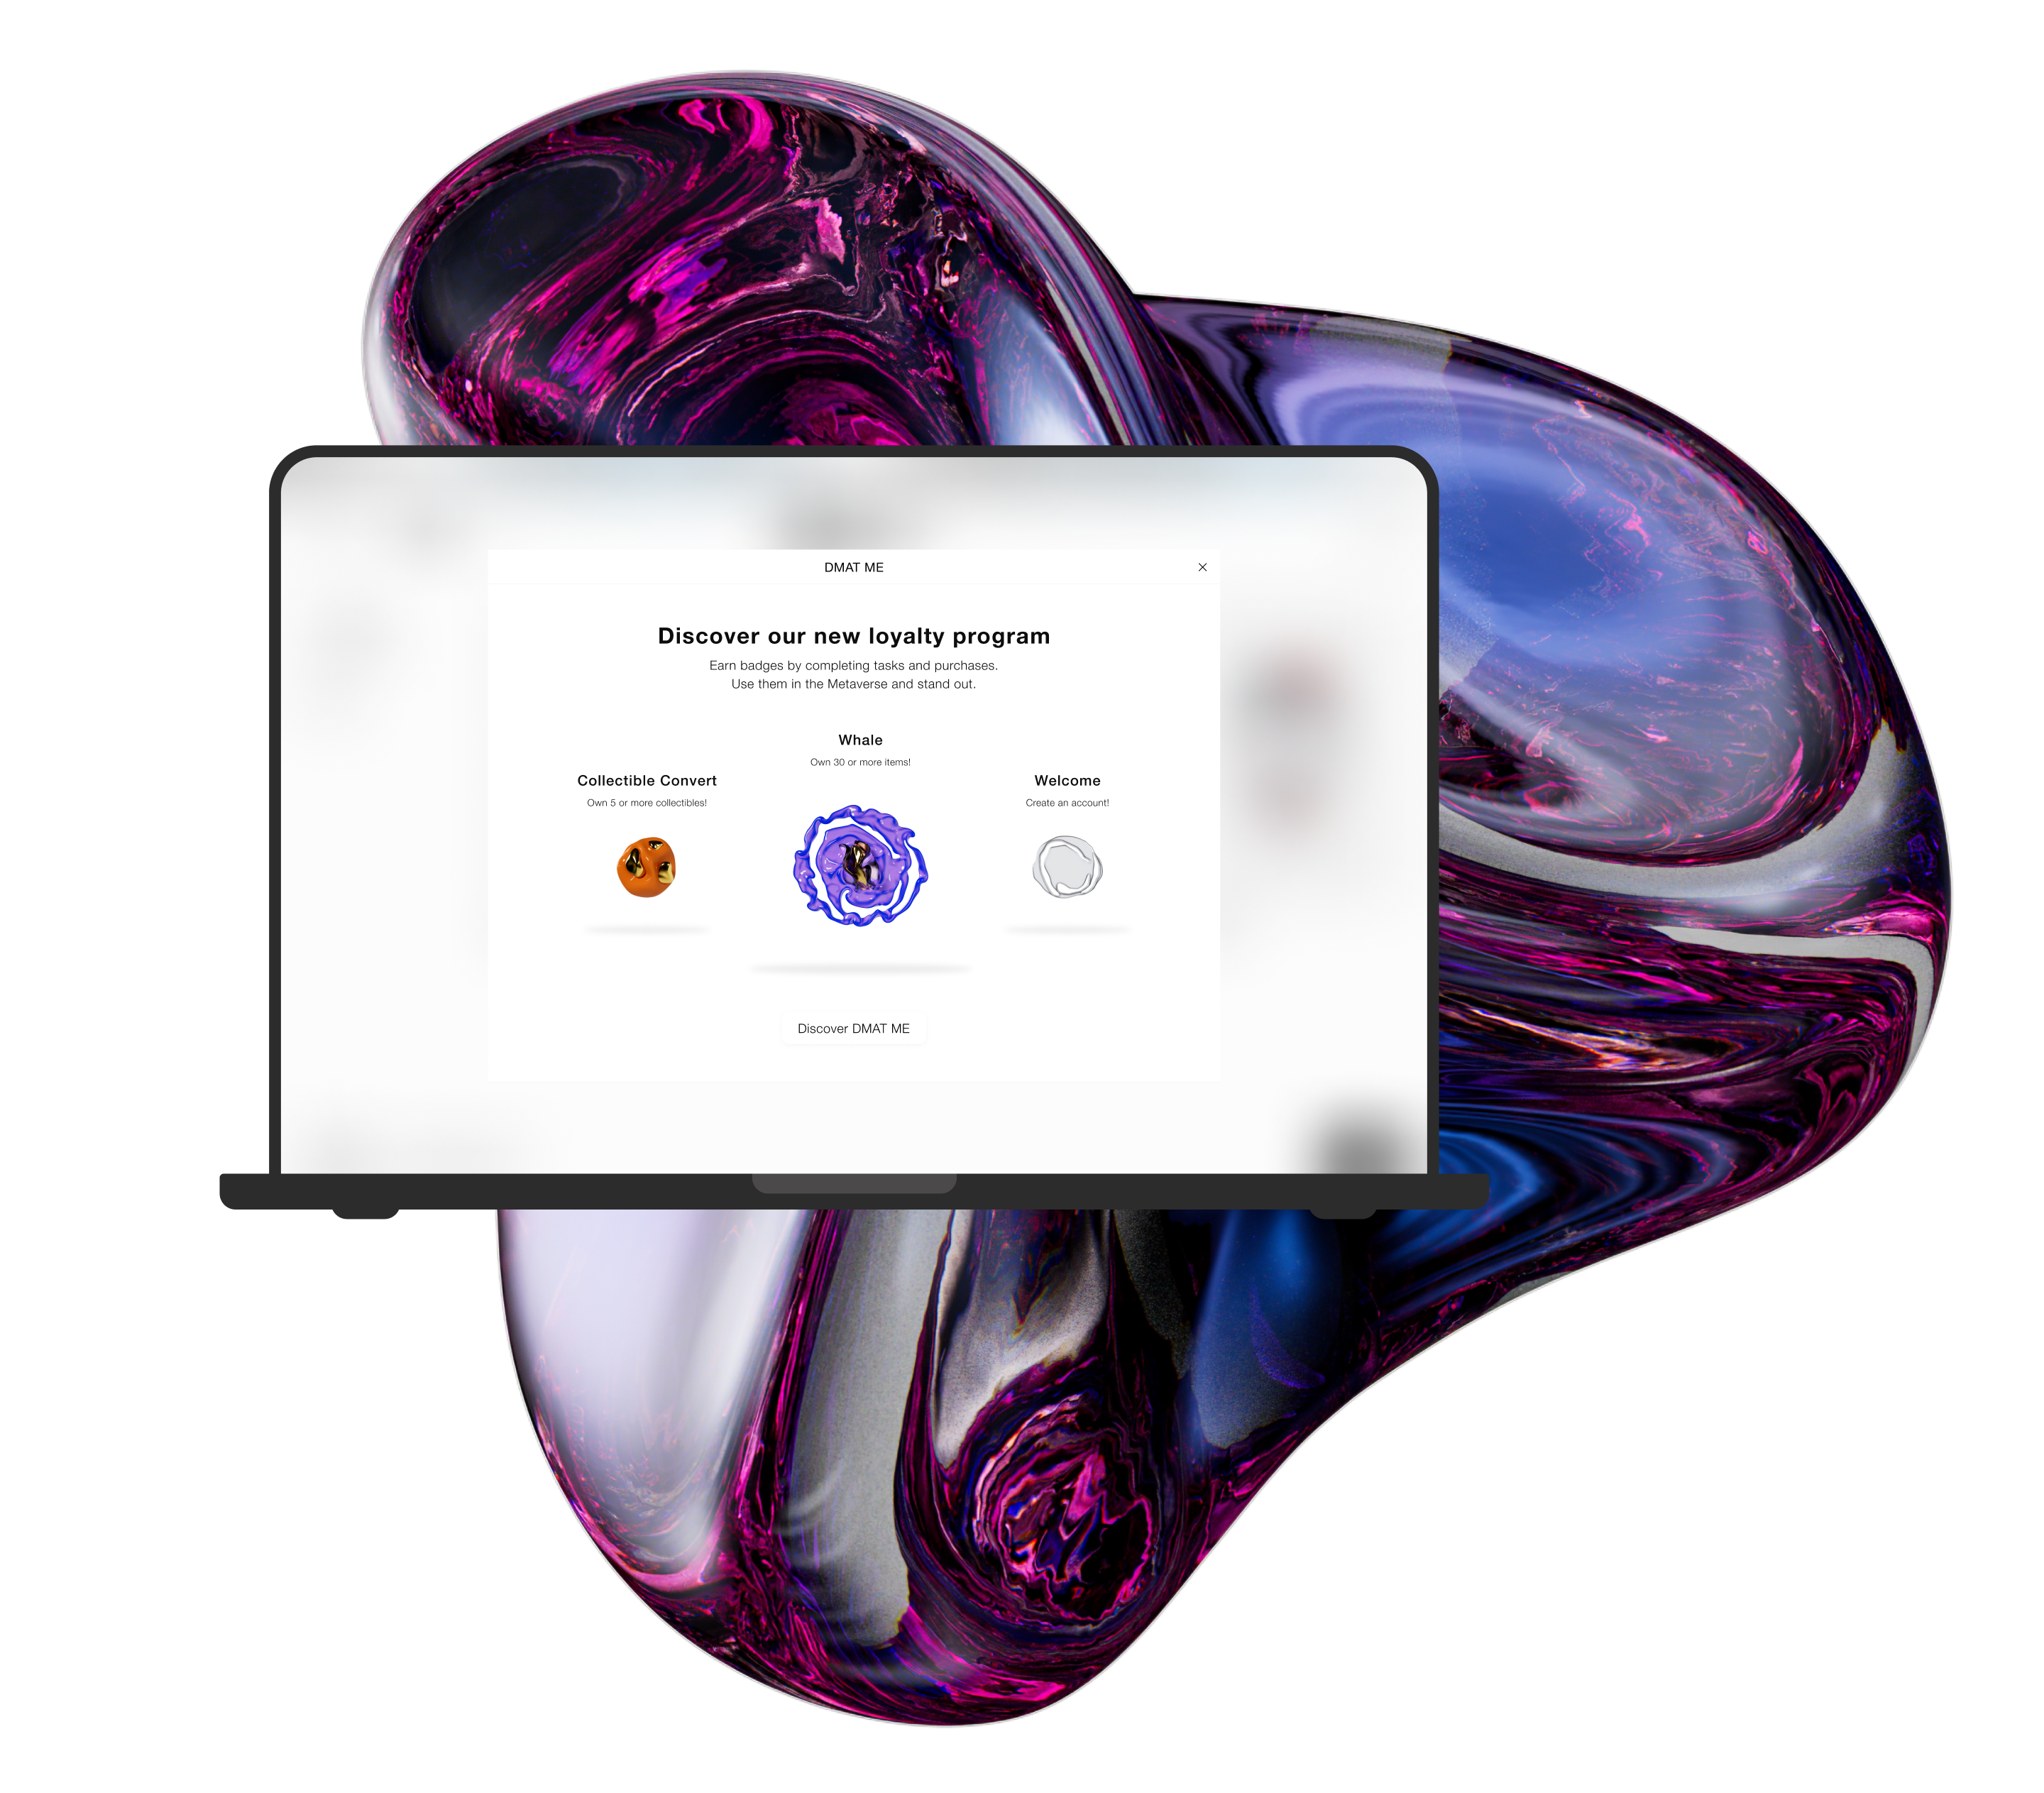 A laptop mockup with a loyalty program UI design place on an abstract shape background